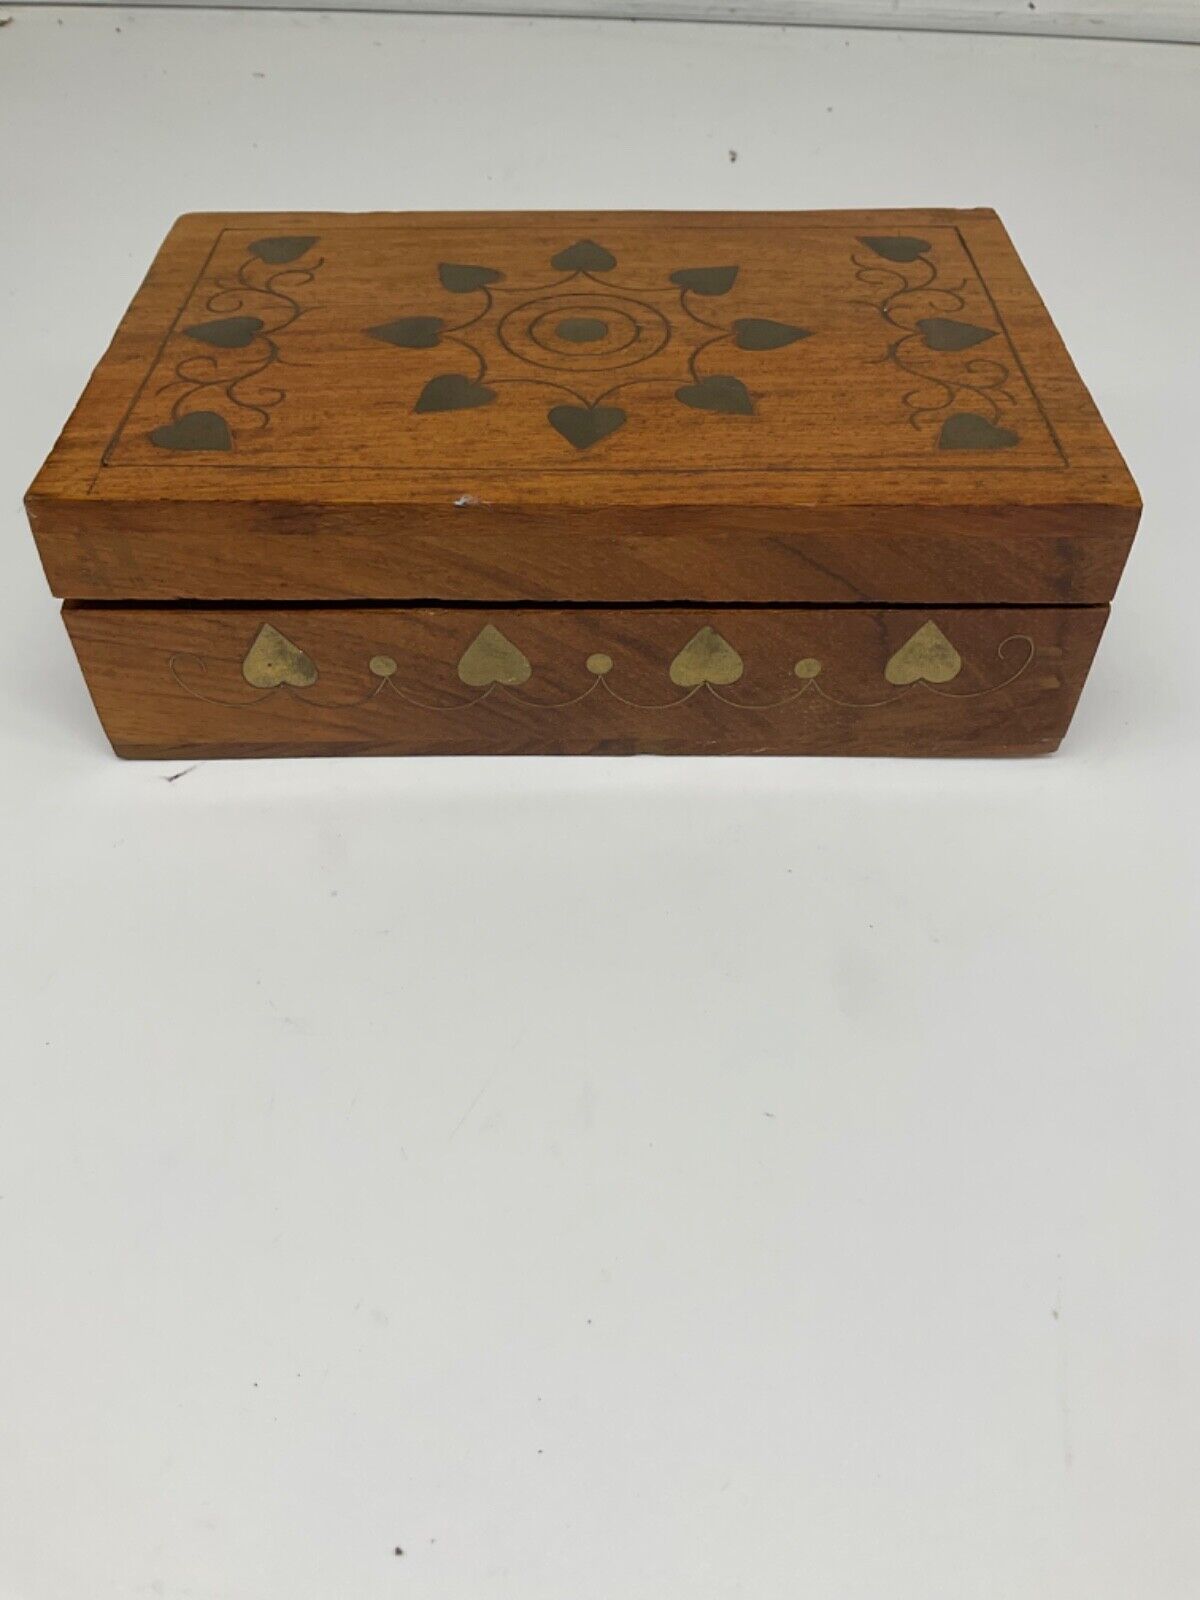 Handcarved Wooden Box Metallic Inlay 10x6x4 Hinged Lid Red lining